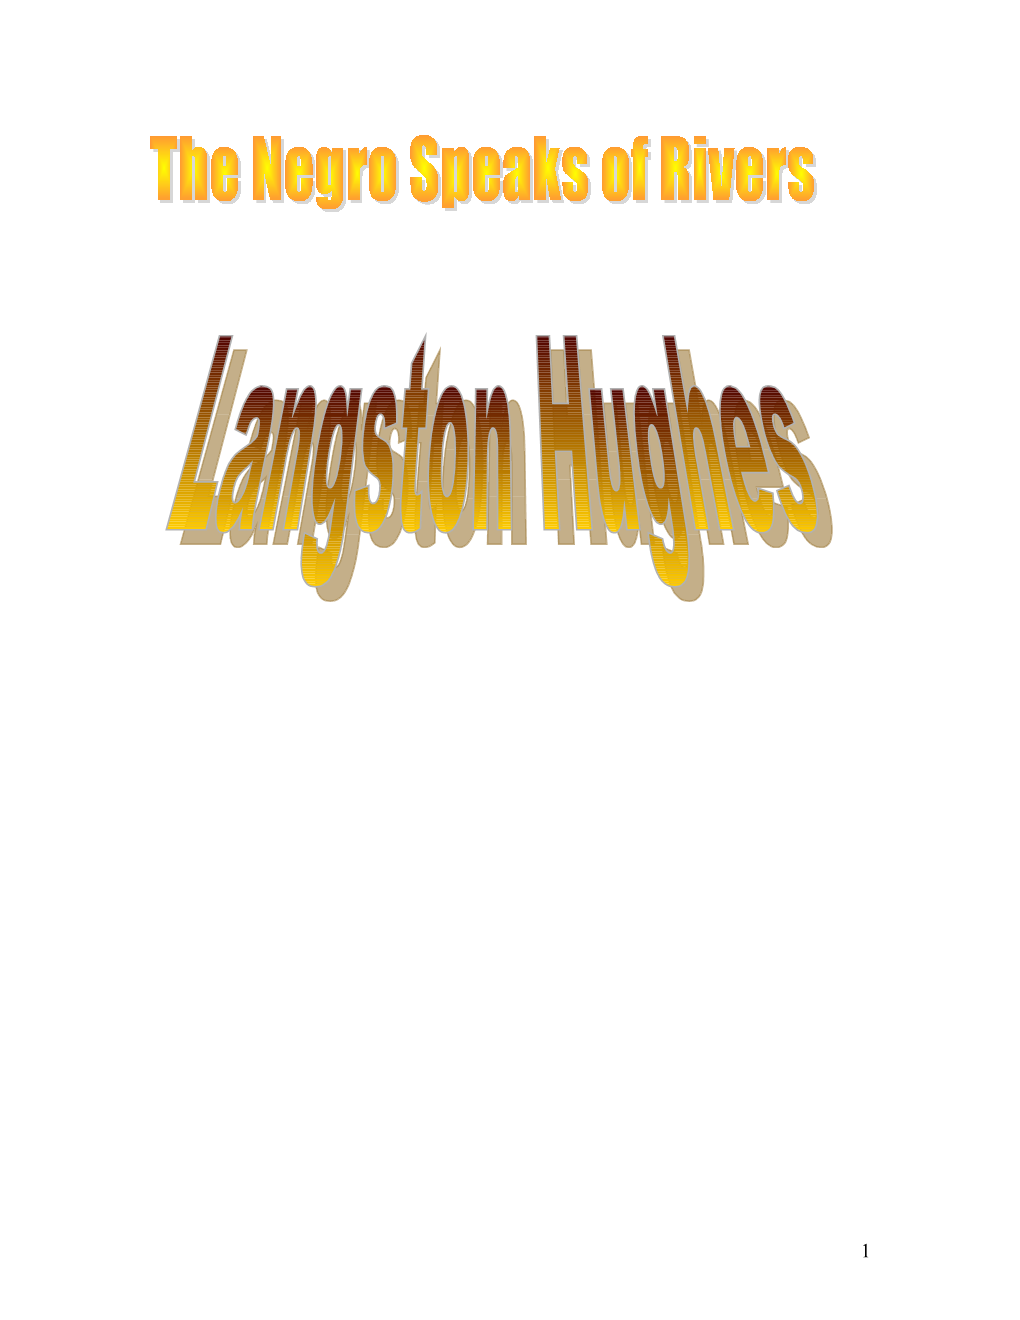 Langston Hughes Was Born in 1902 and Died in 1967